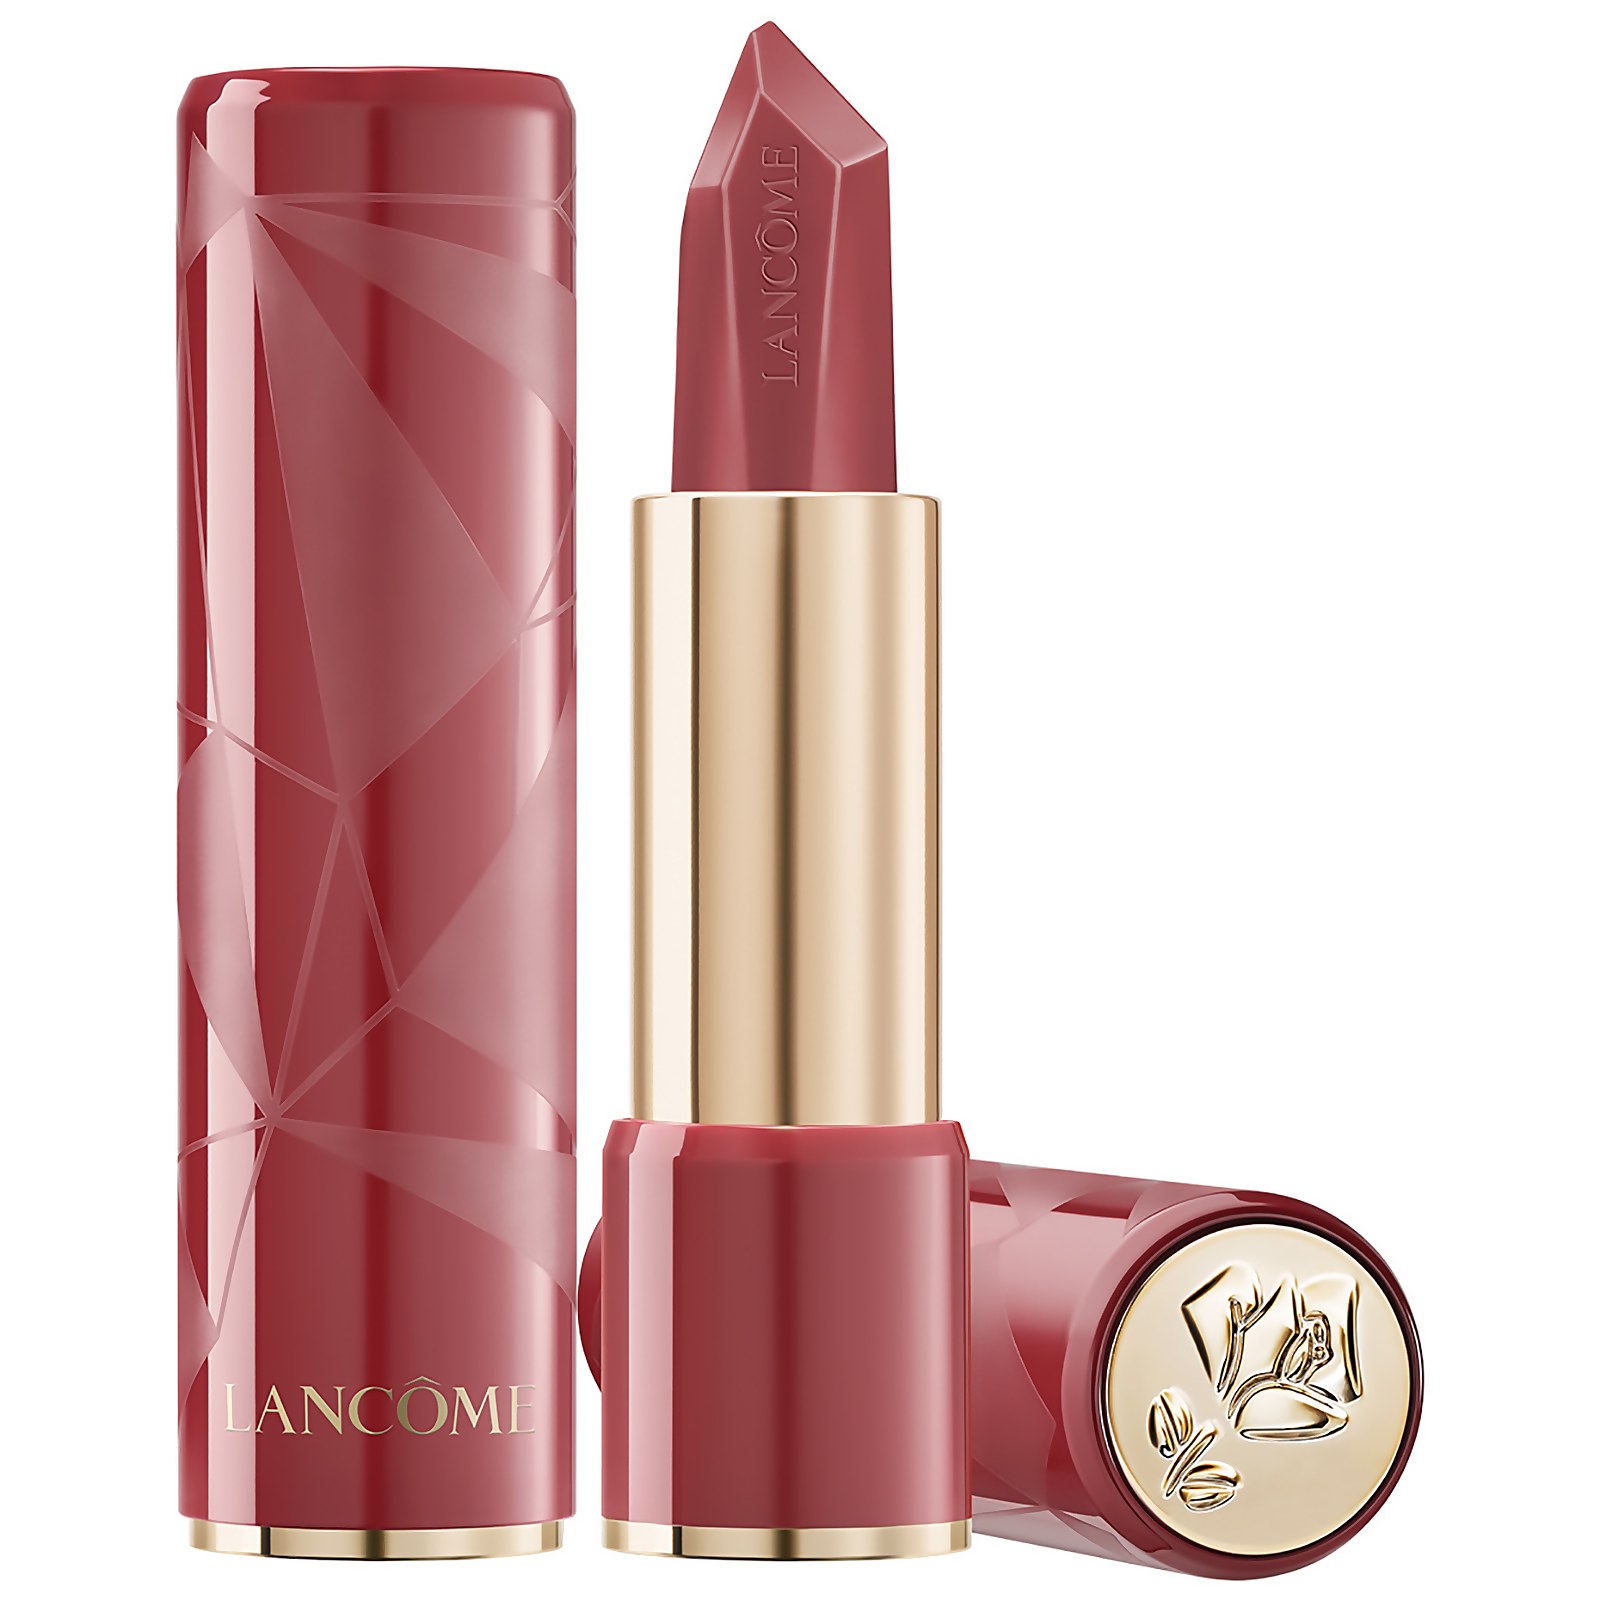 Image of Lancome Absolu Rouge Ruby Cream 3g (Various Shades) - 03 Kiss Me Ruby